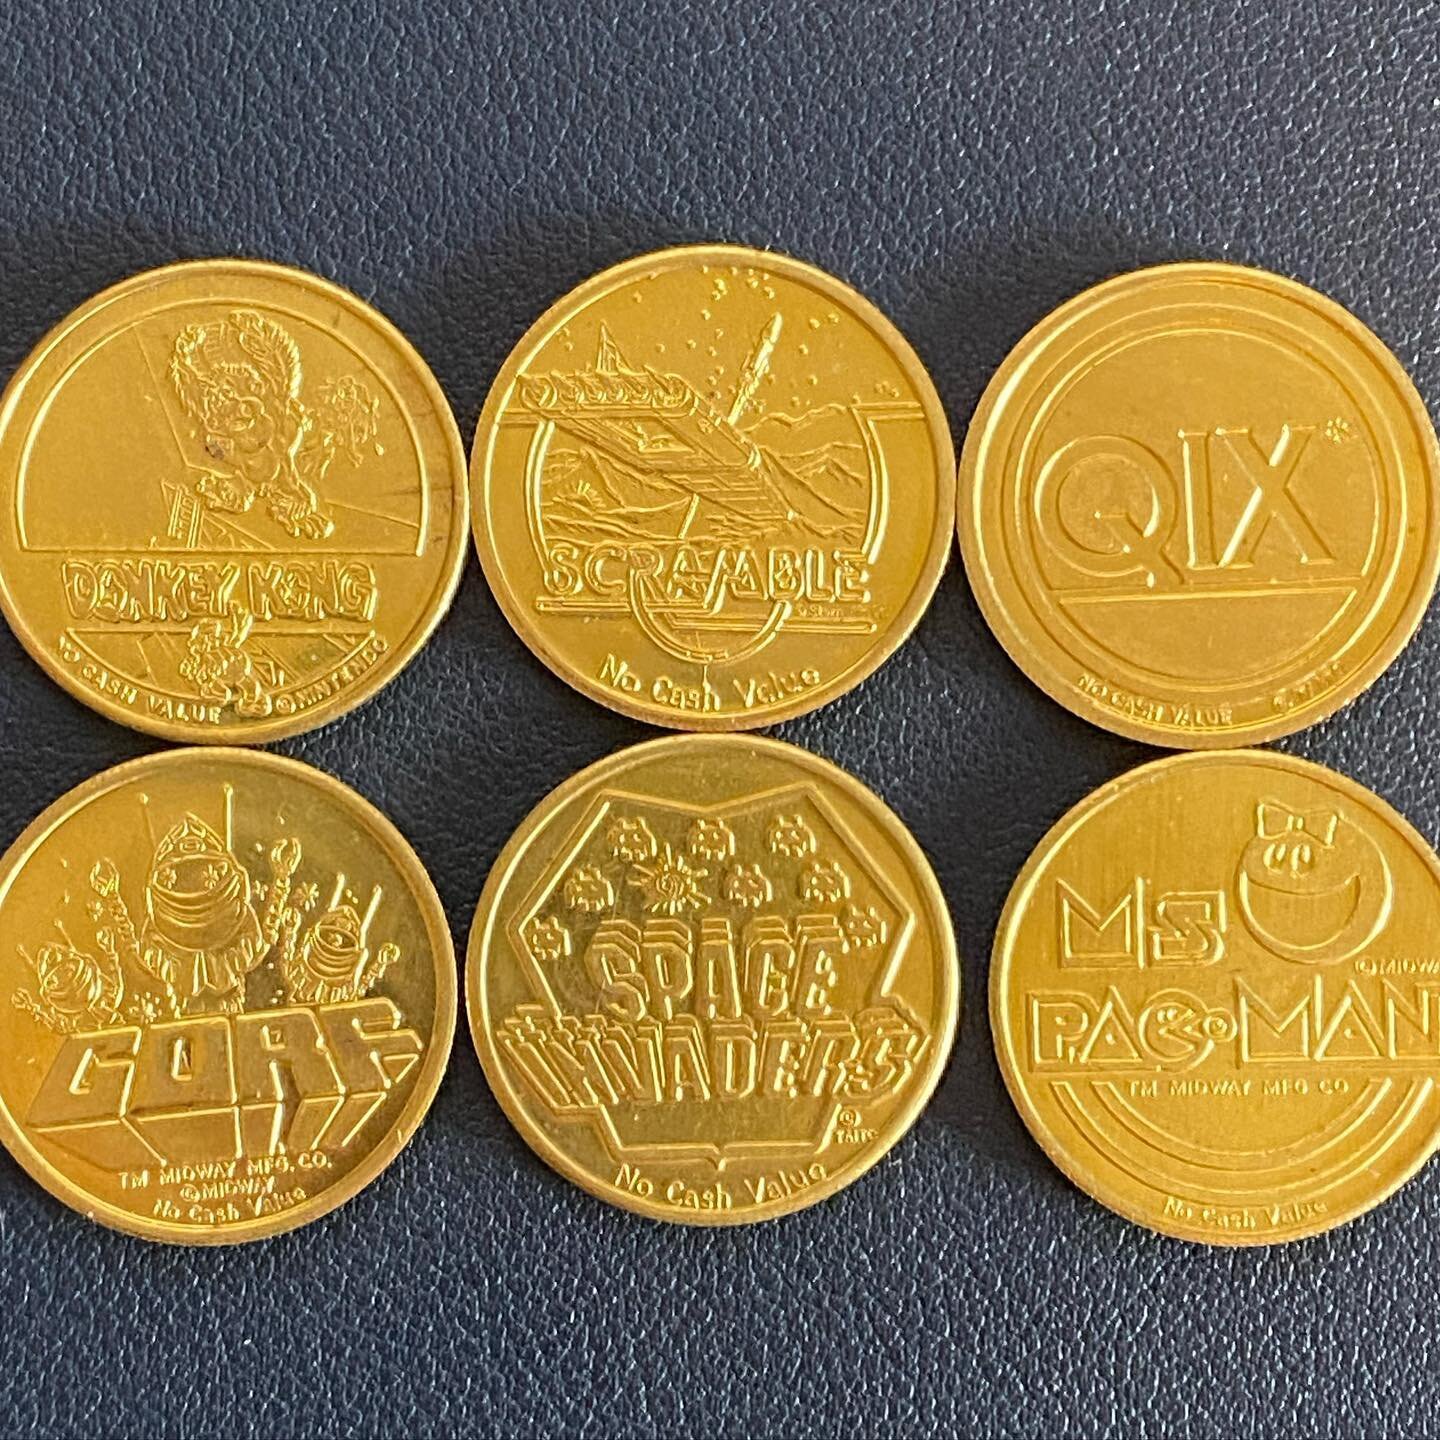 One of the more interesting game related items we&rsquo;ve recently acquired. Arcade tokens from the 1982 World&rsquo;s Fair and Energy Exposition in Knoxville Tennessee. The Video Expo, from what we can find, was the first video game arcade space at